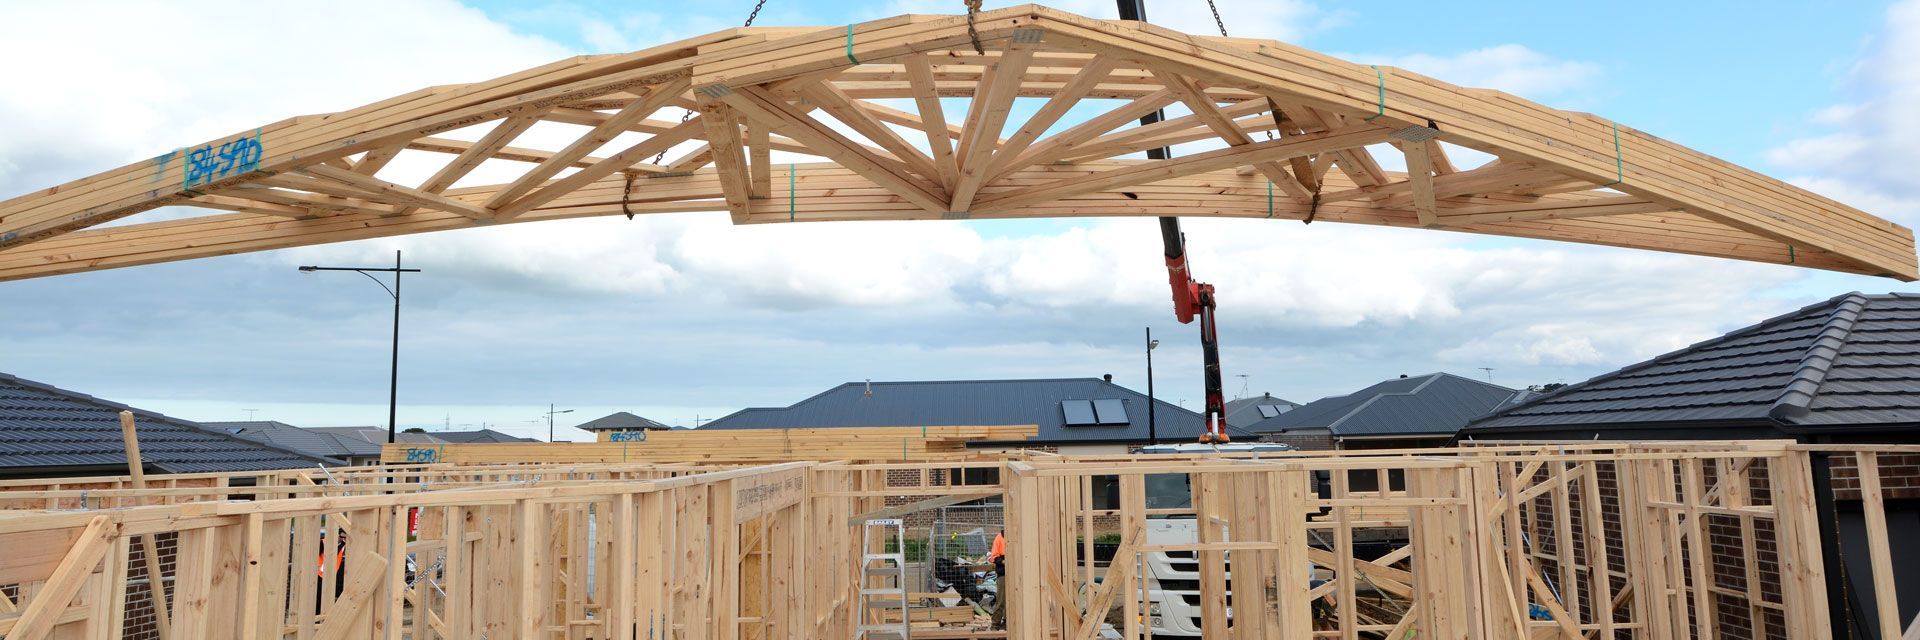 Wood Frame of New Home Construction Site | Glenorchy, TAS | McKay Timber